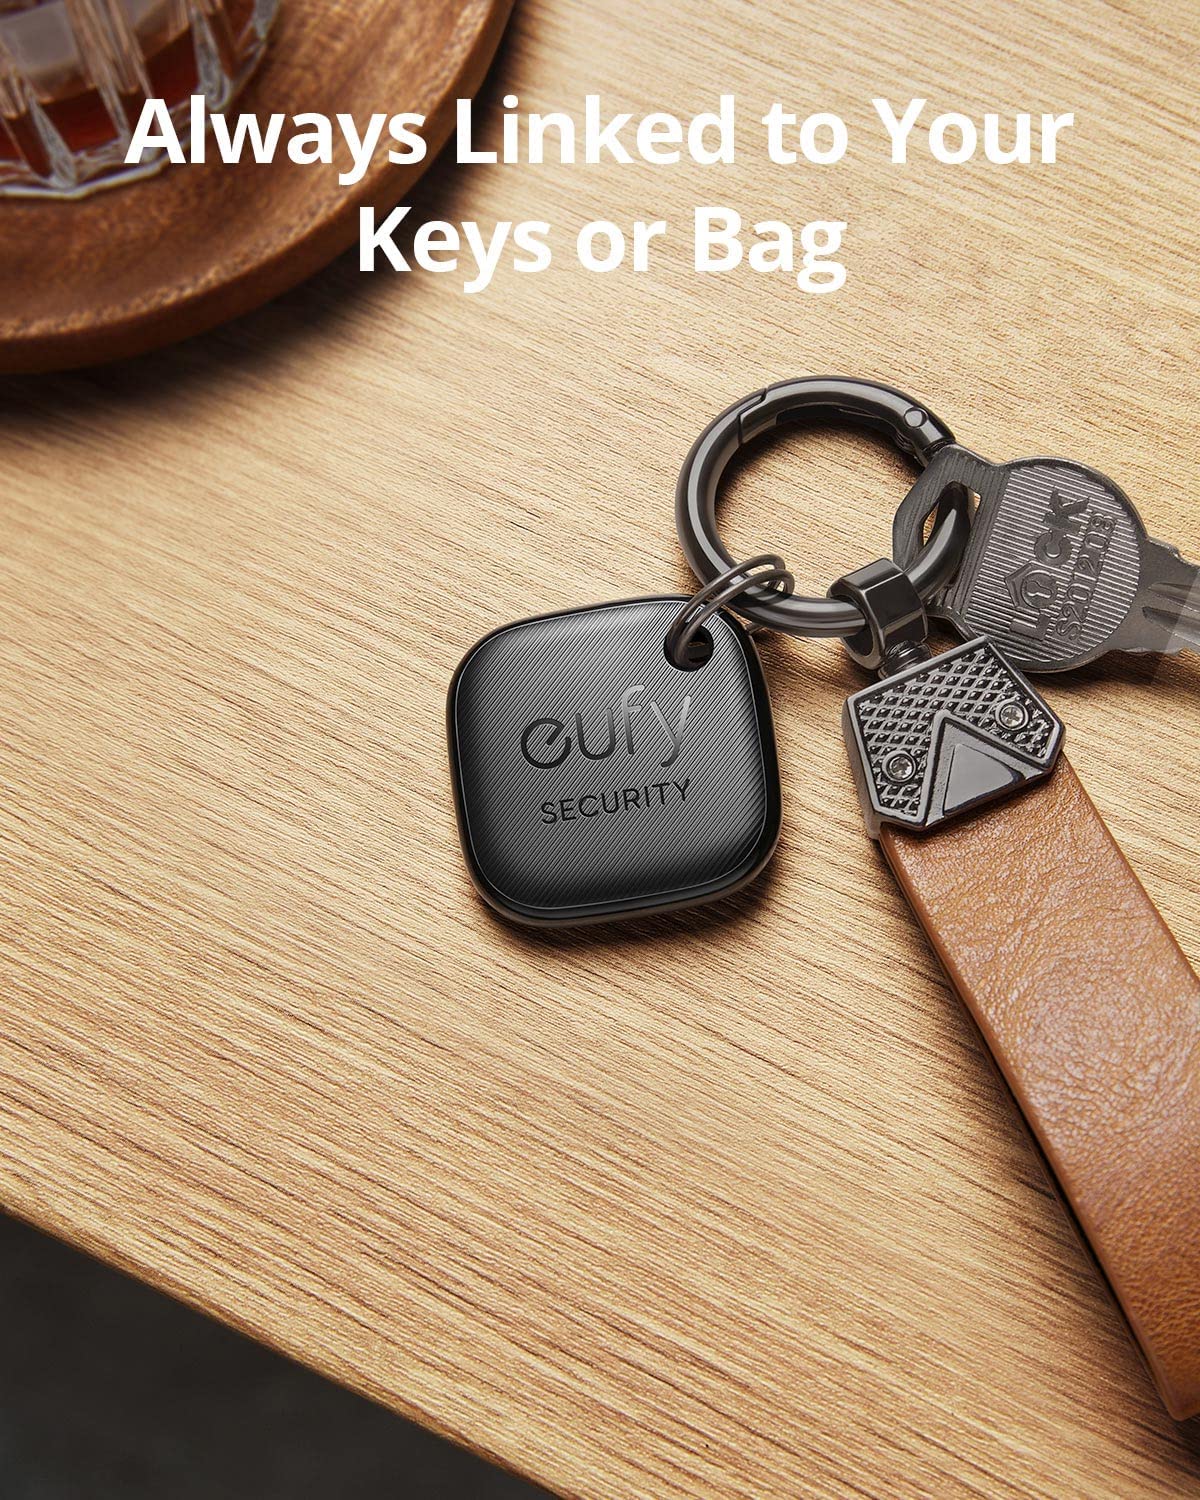 Anker Releases Cheaper AirTag Rival With Find My Support